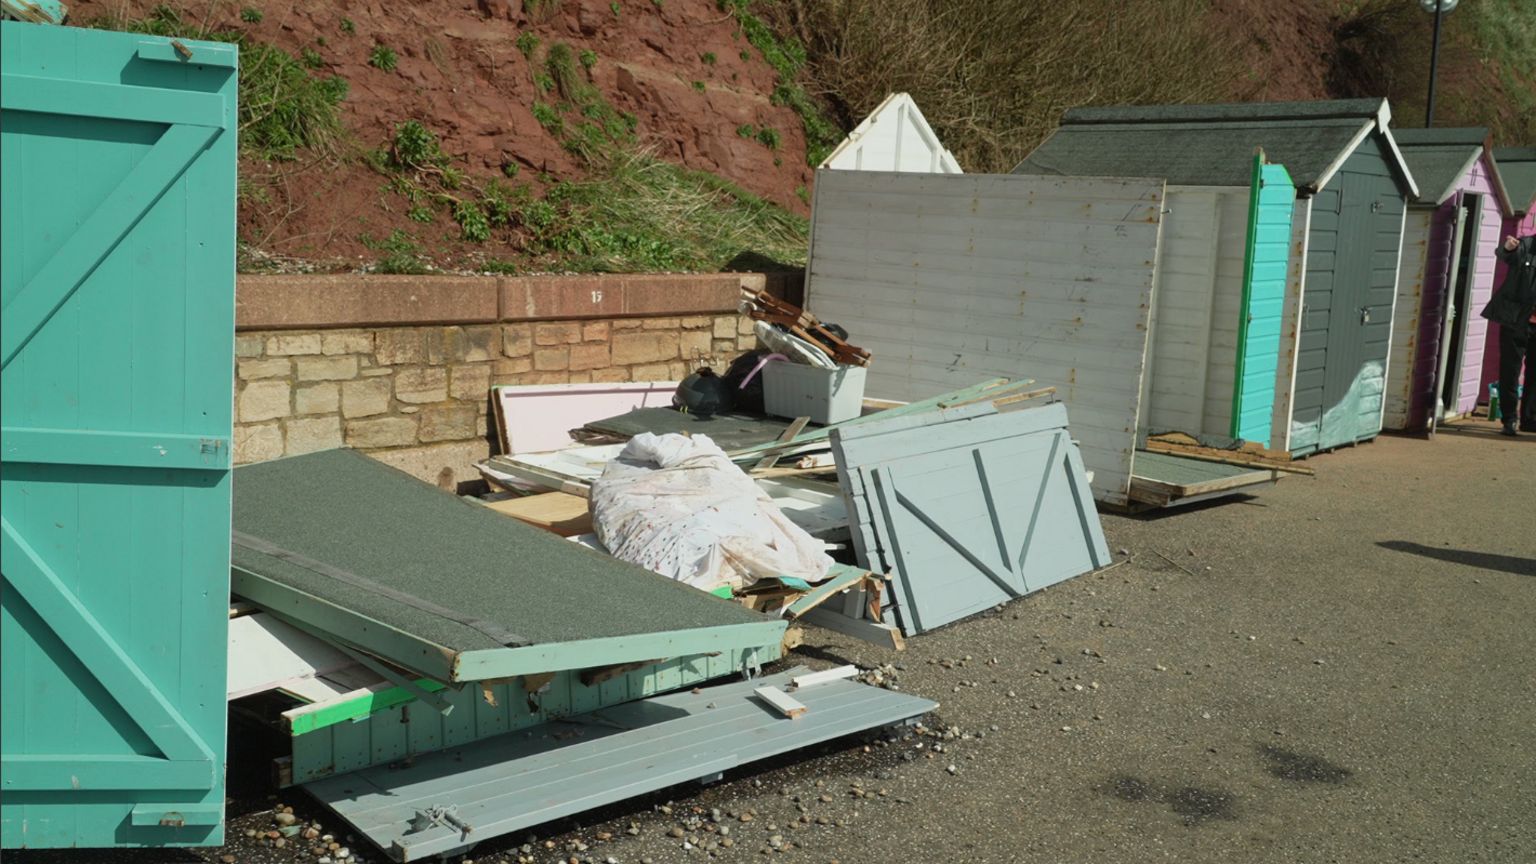 Destroyed beach huts in Seaton